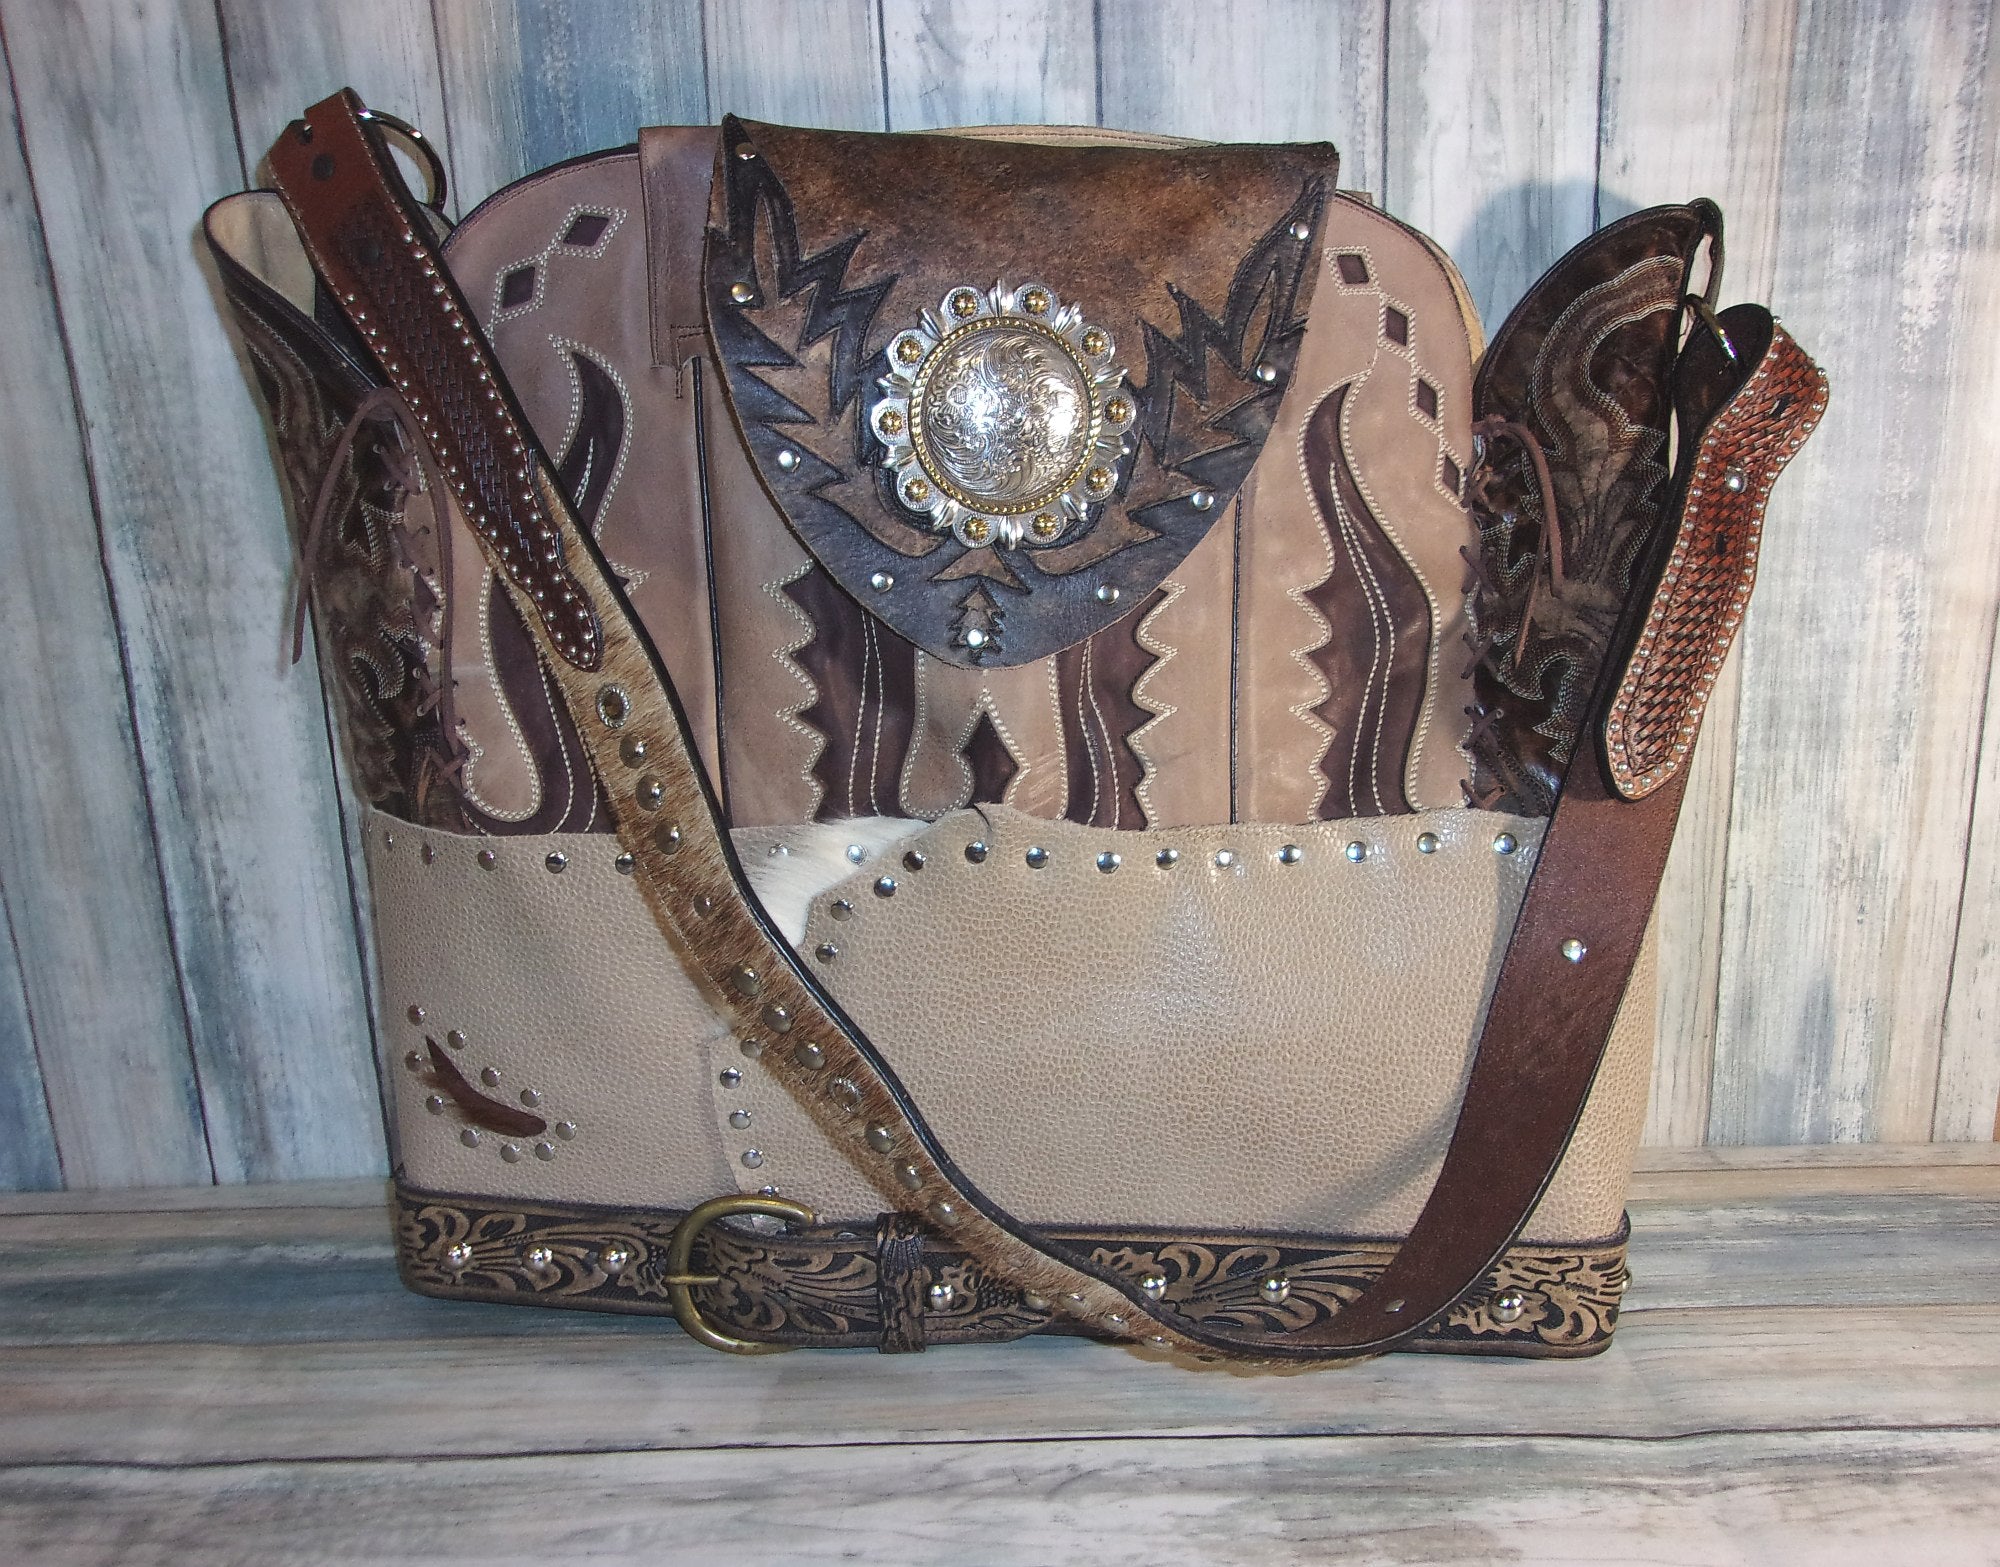 Western Laptop Tote - Extra Large Cowboy Boot Purse - Western Travel Bag LT43 cowboy boot purses, western fringe purse, handmade leather purses, boot purse, handmade western purse, custom leather handbags Chris Thompson Bags